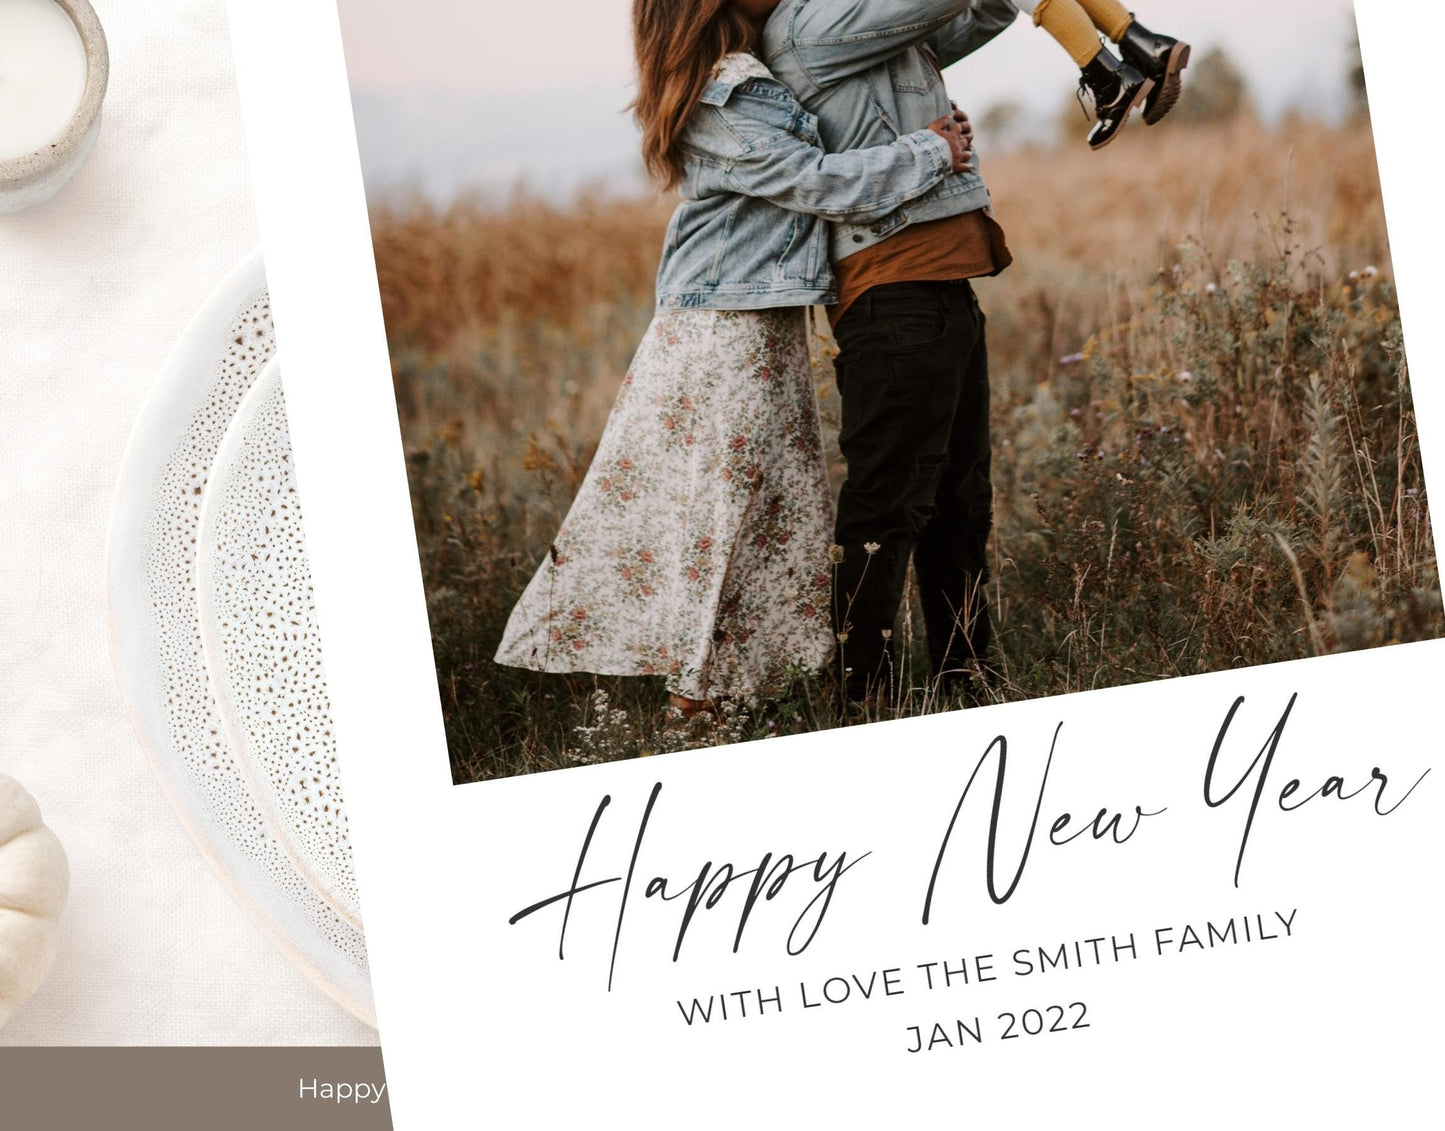 Happy New Year Card Photoshop Template